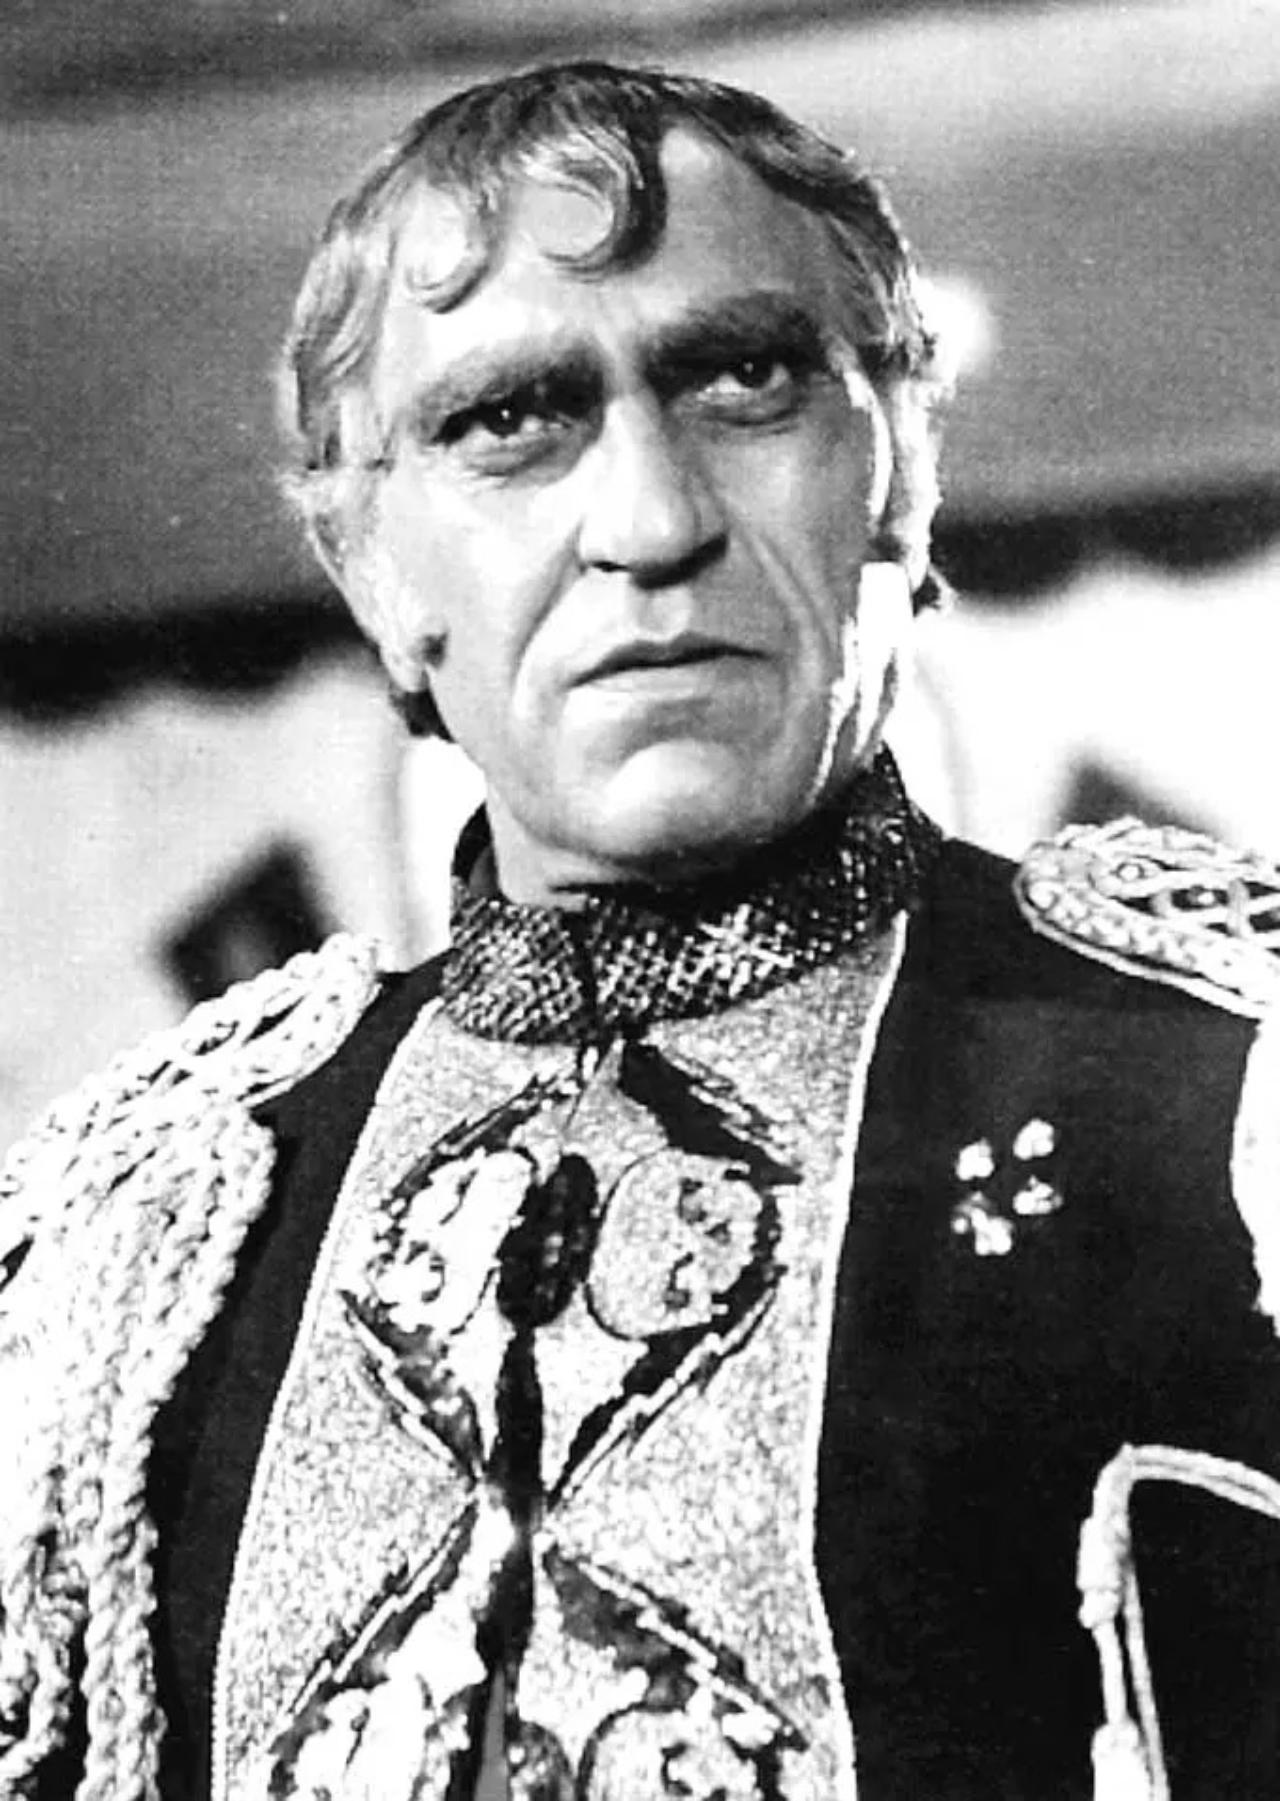 Amrish Puri died following a brain haemorrhage in 2005. His condition required frequent removal of the blood accumulated in the cerebral region of the brain